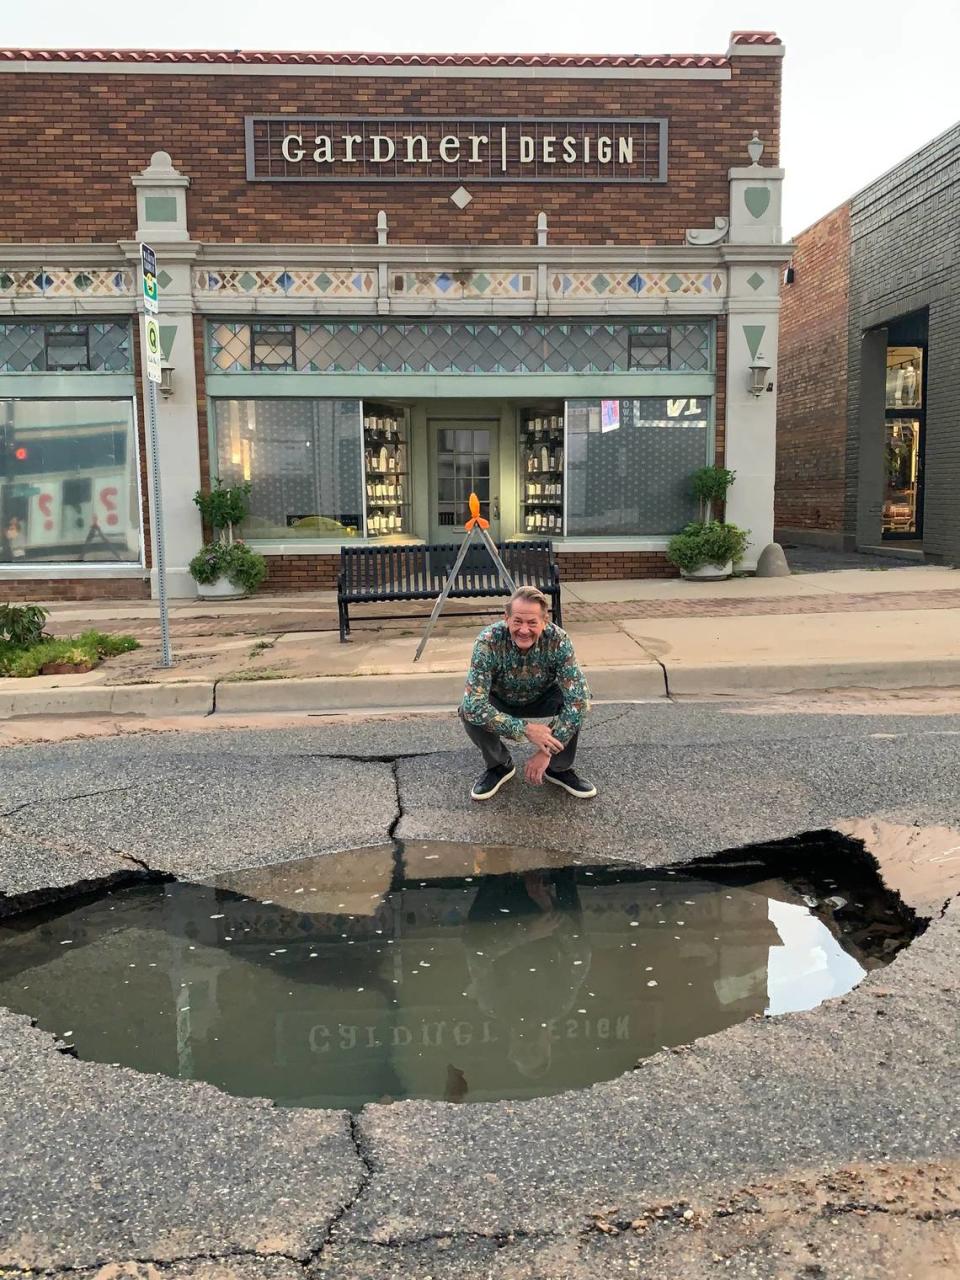 Bill Gardner discovered a large sinkhole that opened up in front of his longtime Gardner Design shop Wednesday morning.